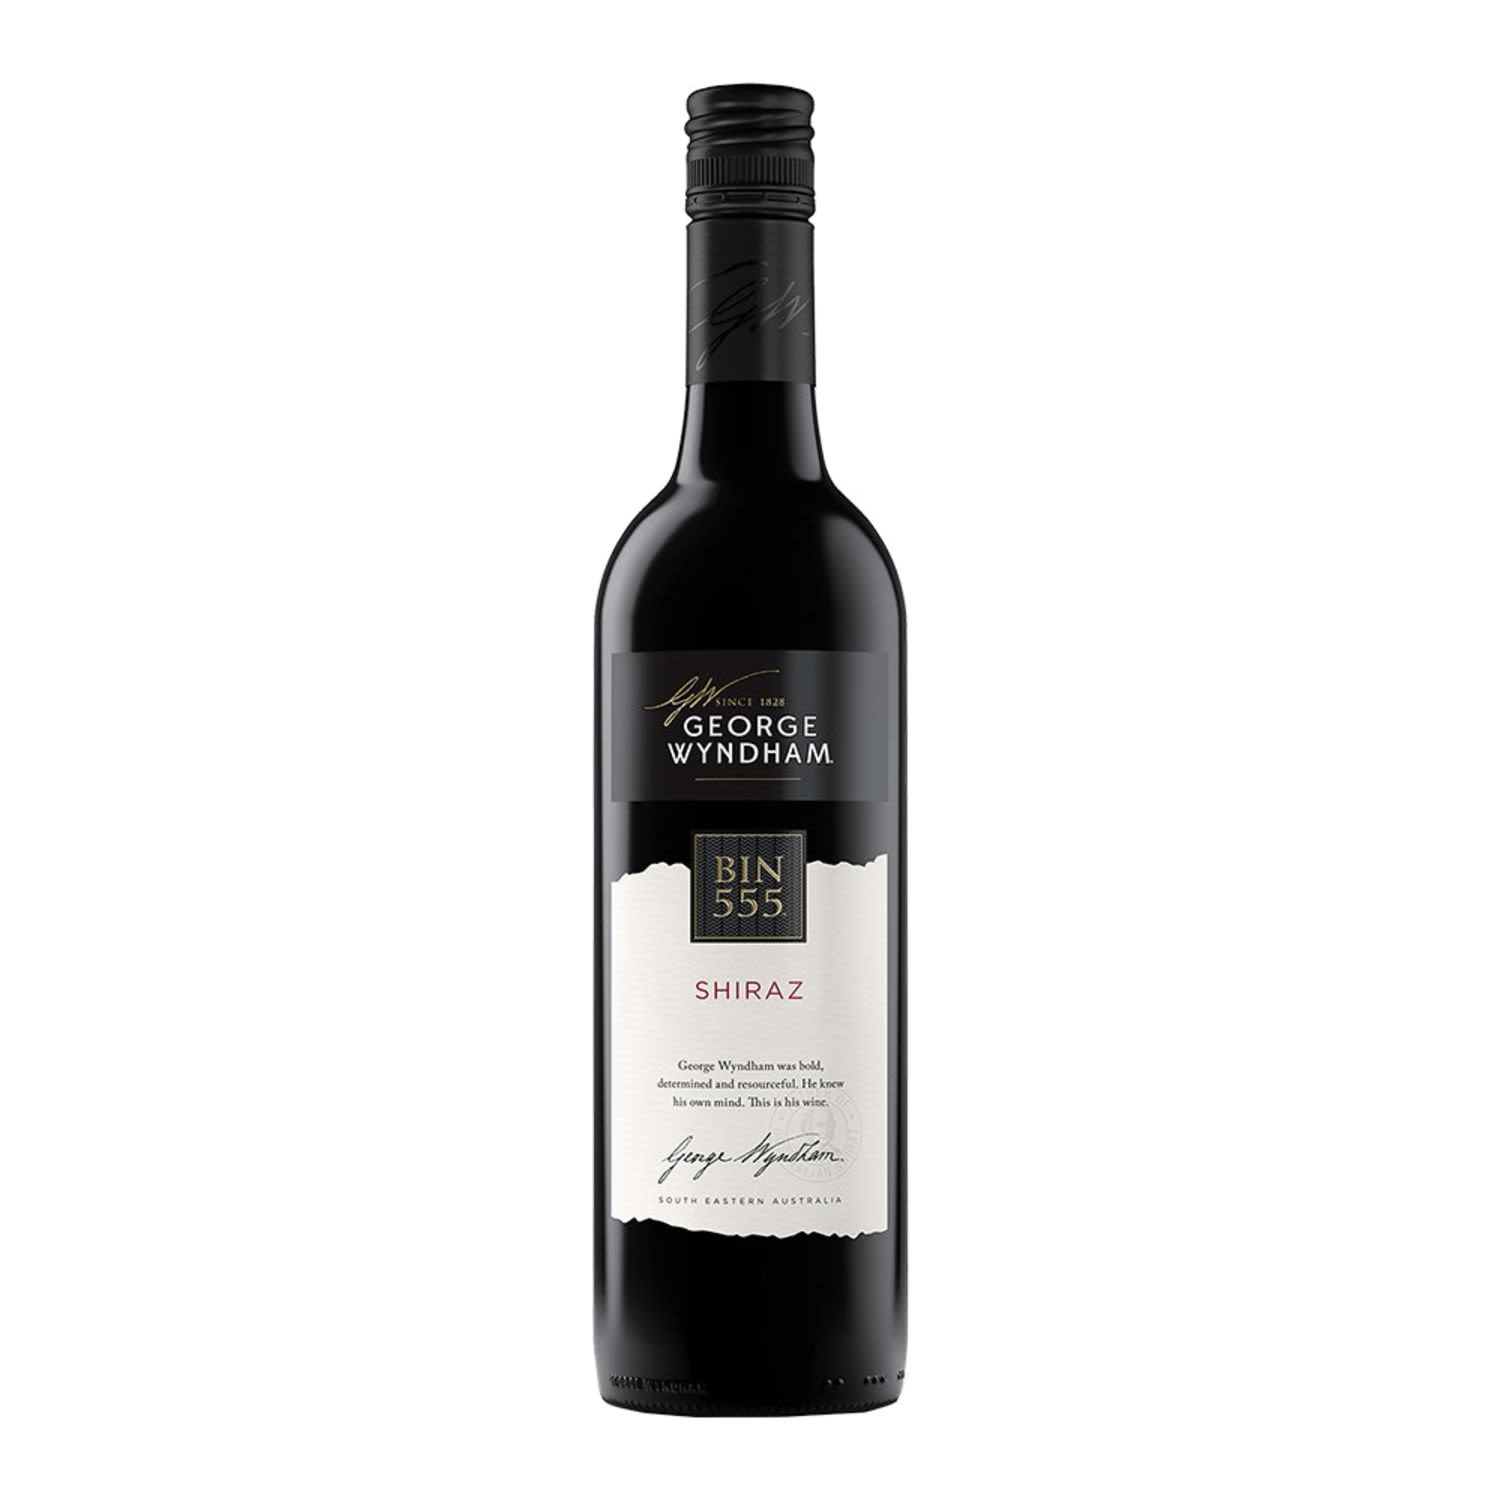 George Wyndham Bin 555 Shiraz is a classically bold Australian Shiraz that is rich and generous yet beautifully balanced.<br /> <br />Alcohol Volume: 13.00%<br /><br />Pack Format: Bottle<br /><br />Standard Drinks: 8.4</br /><br />Pack Type: Bottle<br /><br />Country of Origin: Australia<br /><br />Region: South Eastern Australia<br /><br />Vintage: Vintages Vary<br />